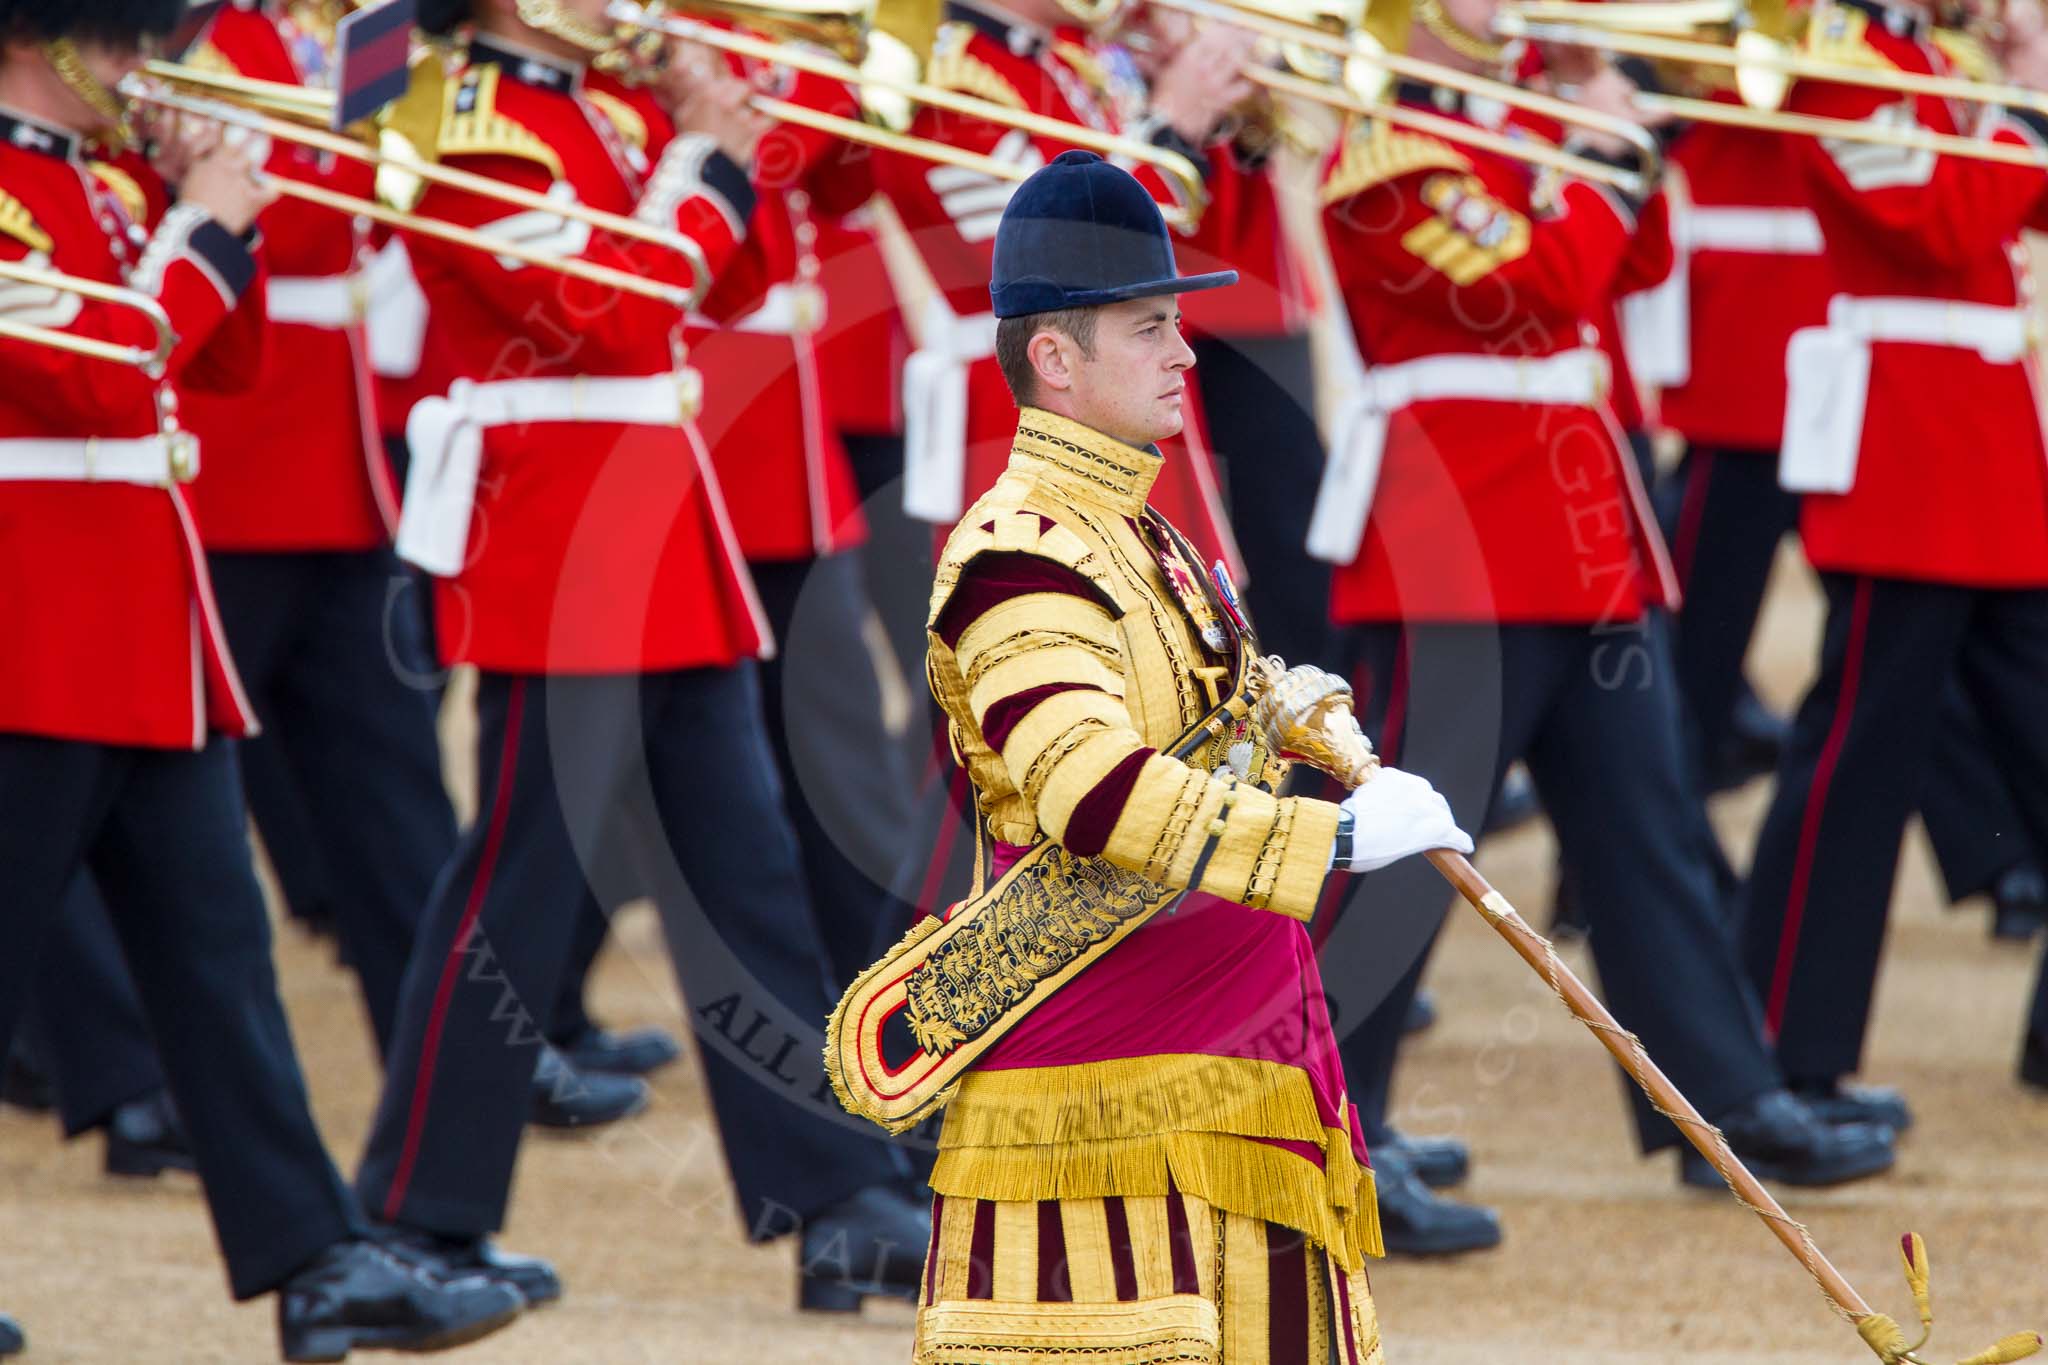 Trooping the Colour 2014.
Horse Guards Parade, Westminster,
London SW1A,

United Kingdom,
on 14 June 2014 at 11:09, image #453